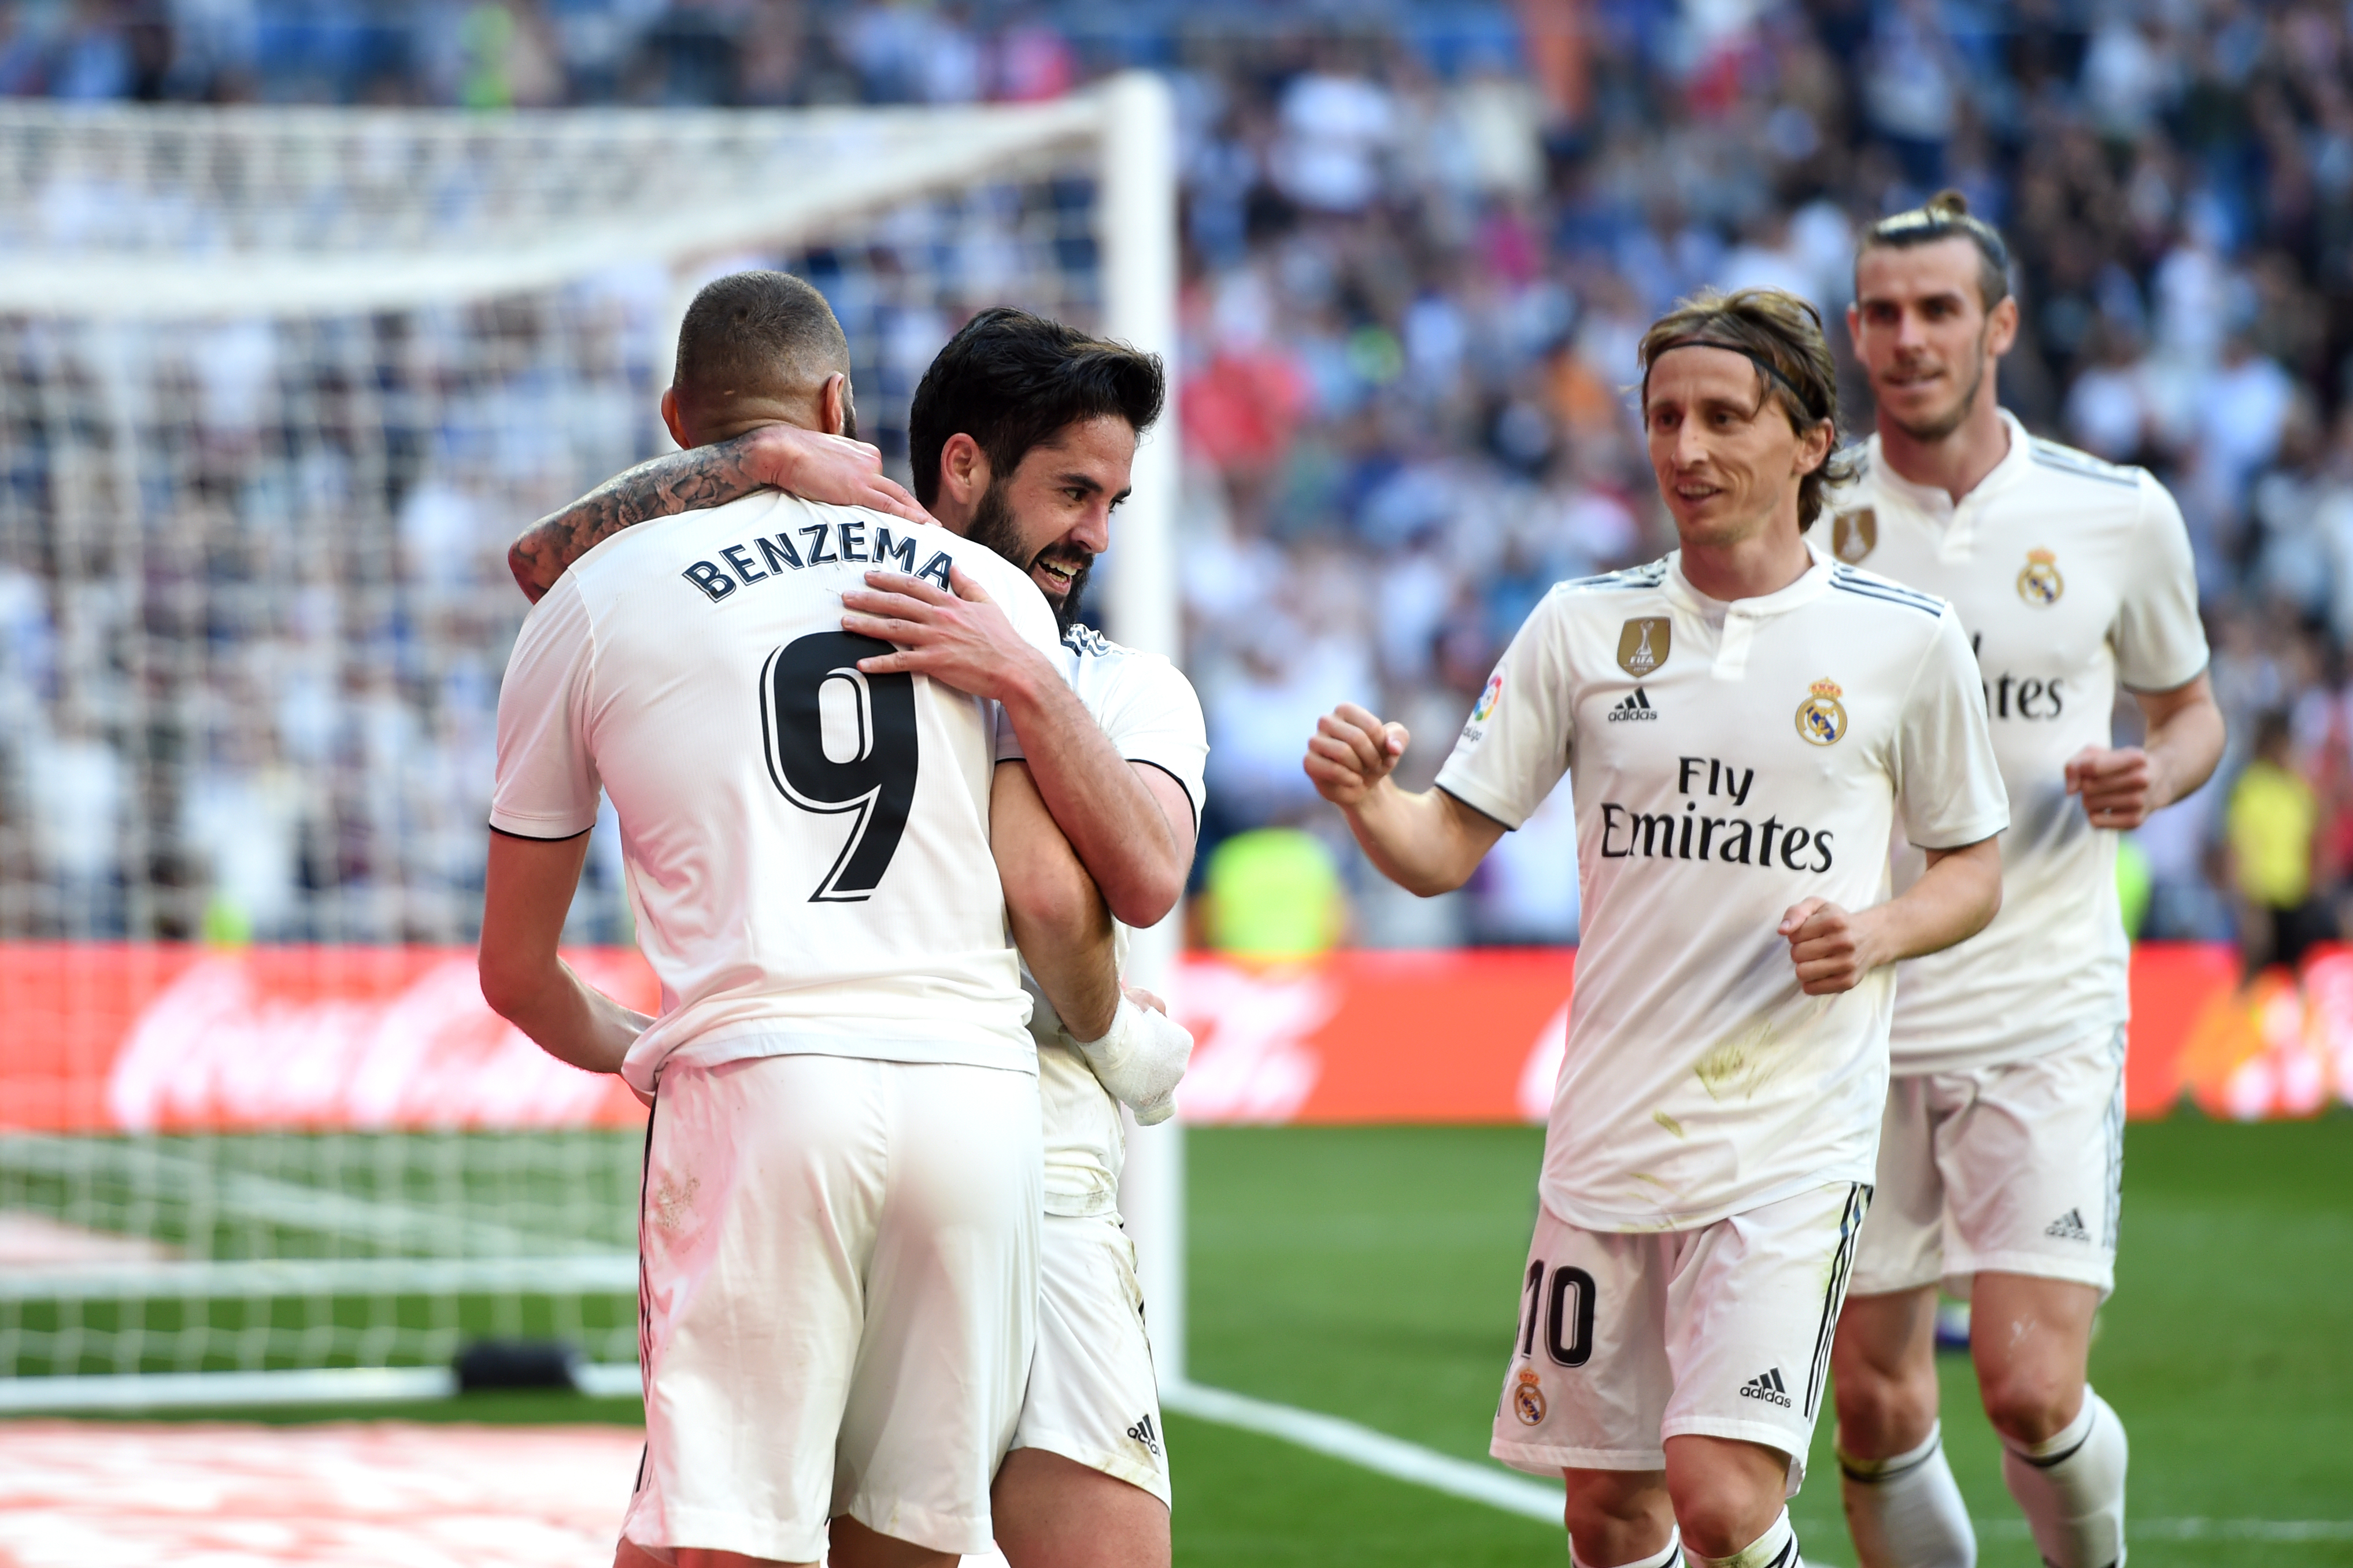 MADRID, SPAIN - MARCH 16: Isco of Real Madrid celebrates with teammates after scoring his team's first goal during the La Liga match between Real Madrid CF and RC Celta de Vigo at Estadio Santiago Bernabeu on March 16, 2019 in Madrid, Spain. (Photo by Denis Doyle/Getty Images)